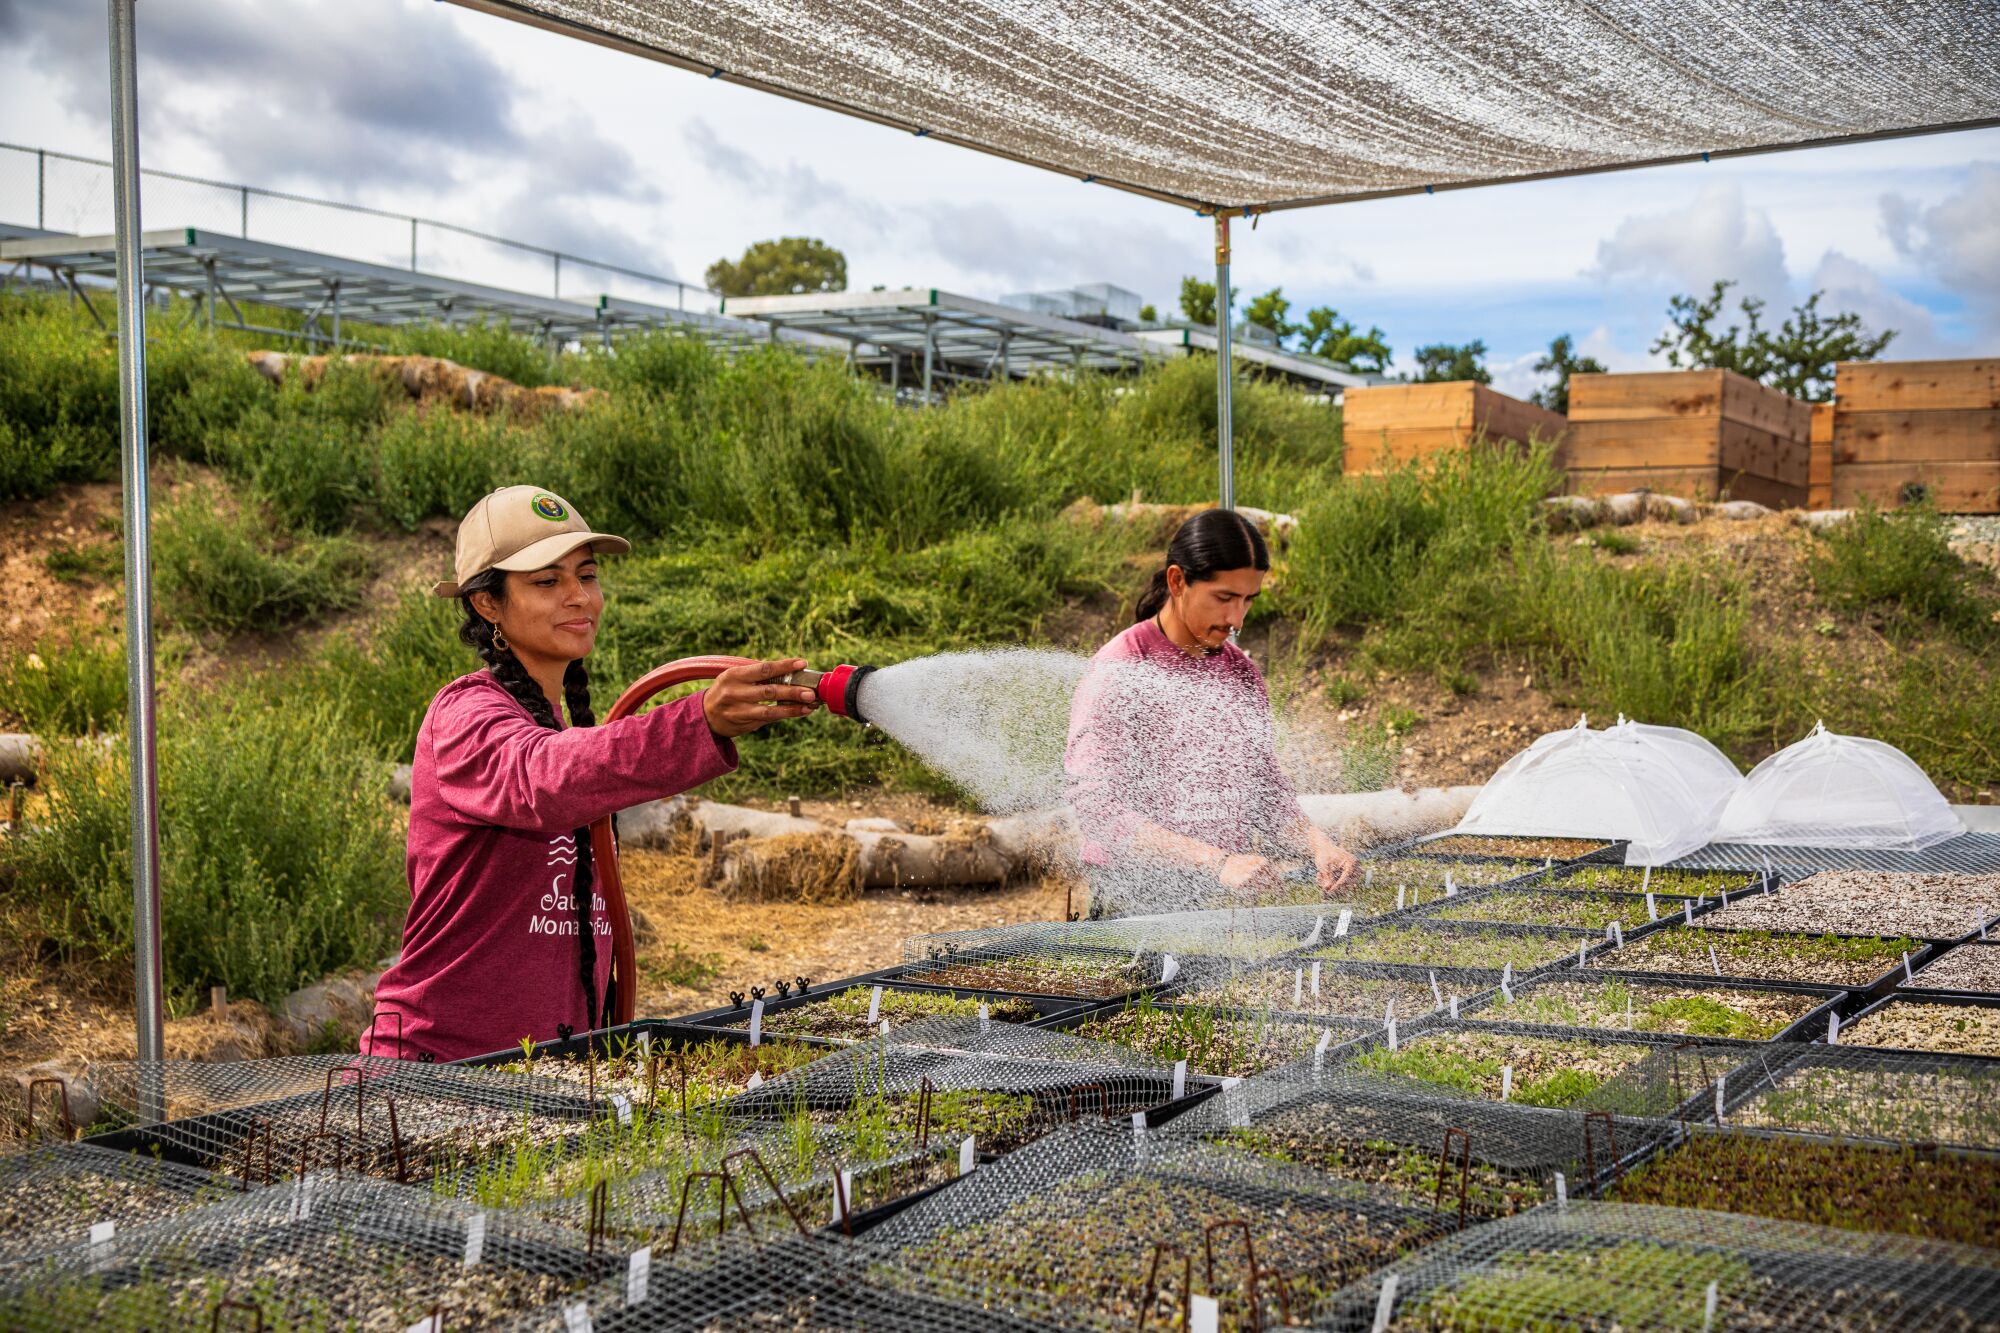 Building a wildlife crossing in L.A. starts with a native plant nursery